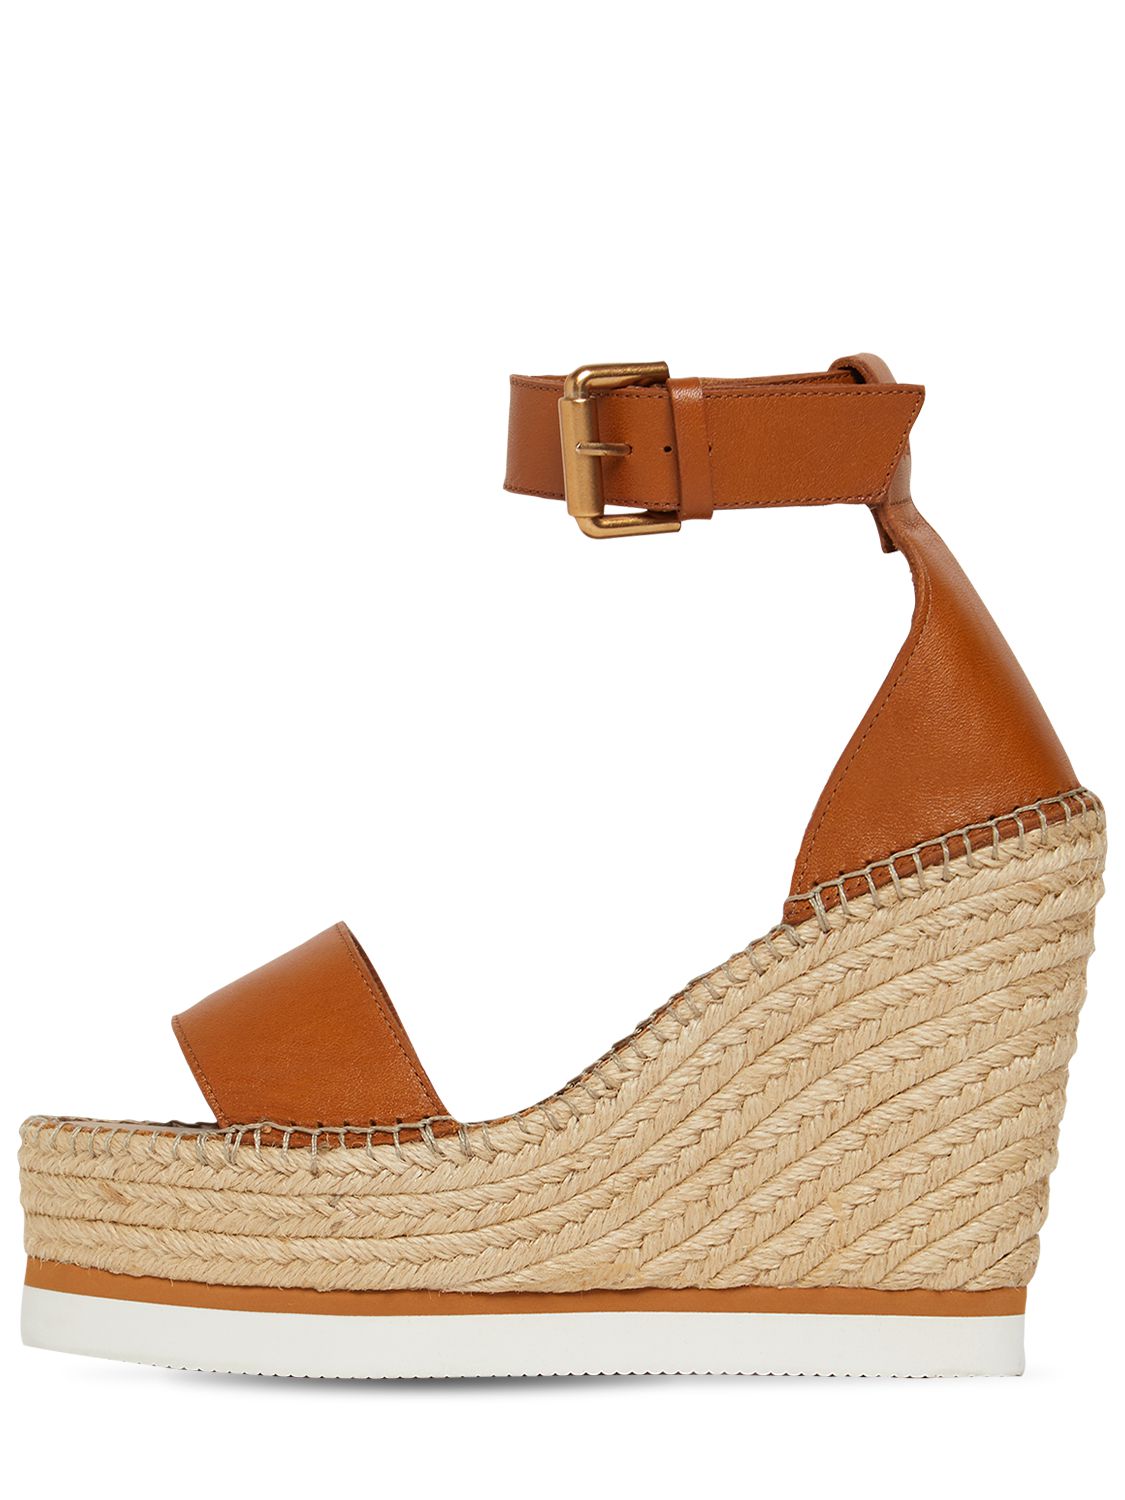 SEE BY CHLOÉ 120mm Glyn Leather Espadrille Wedges